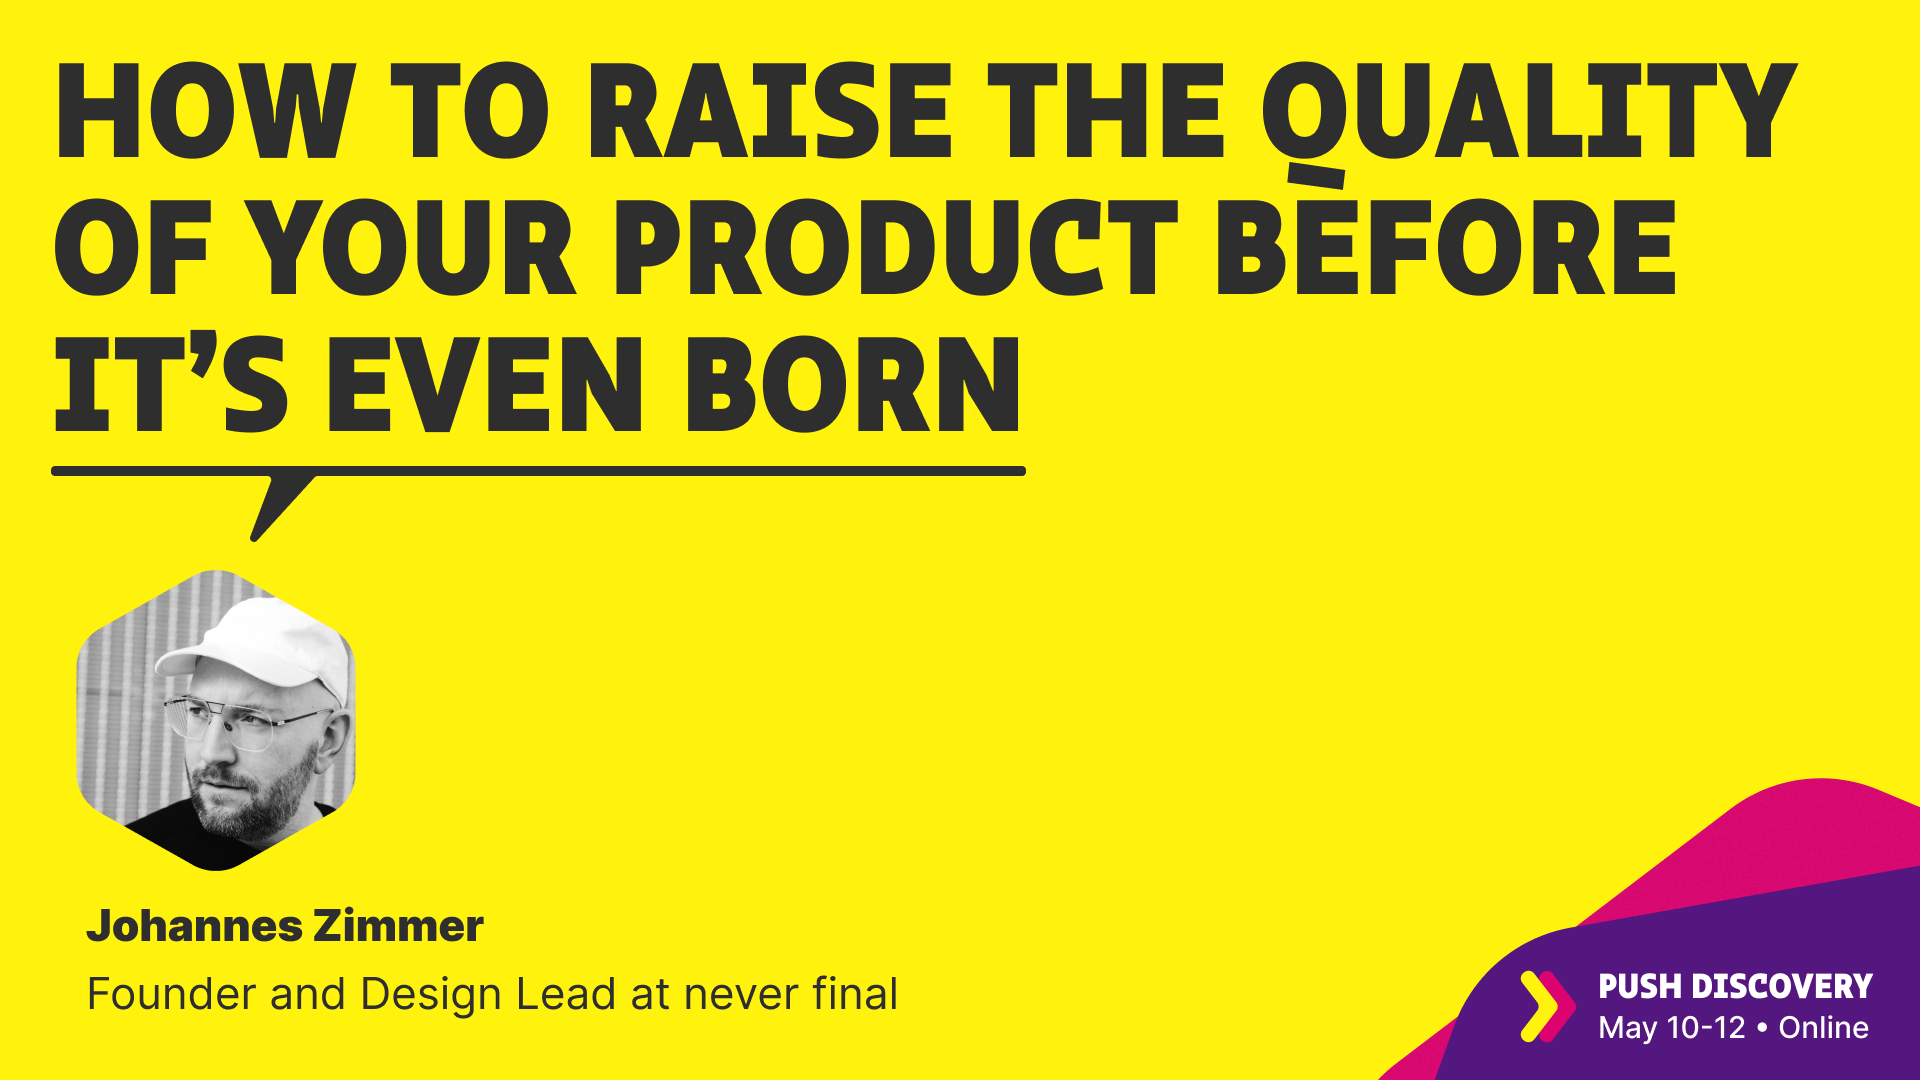 How to raise the quality of your product before it’s even born